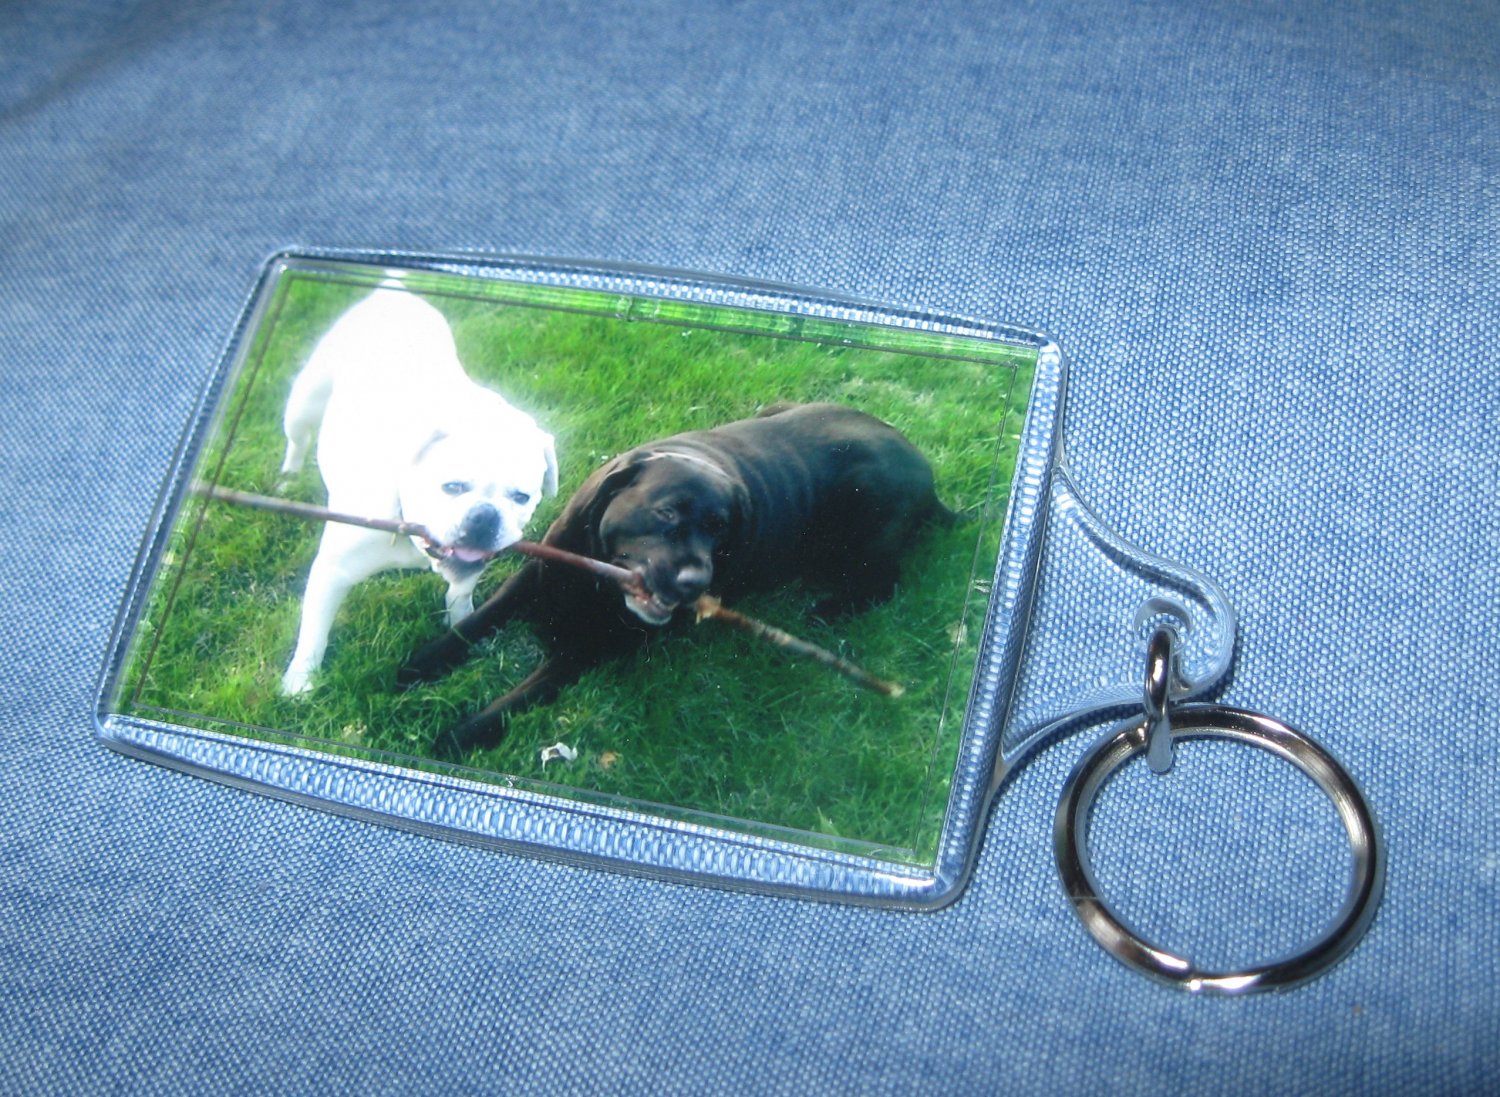 Personalized Pet Photo Key Chain, Bag Tag, Large 2x3 Keychain, ID Tag, Handmade Using Your Photos